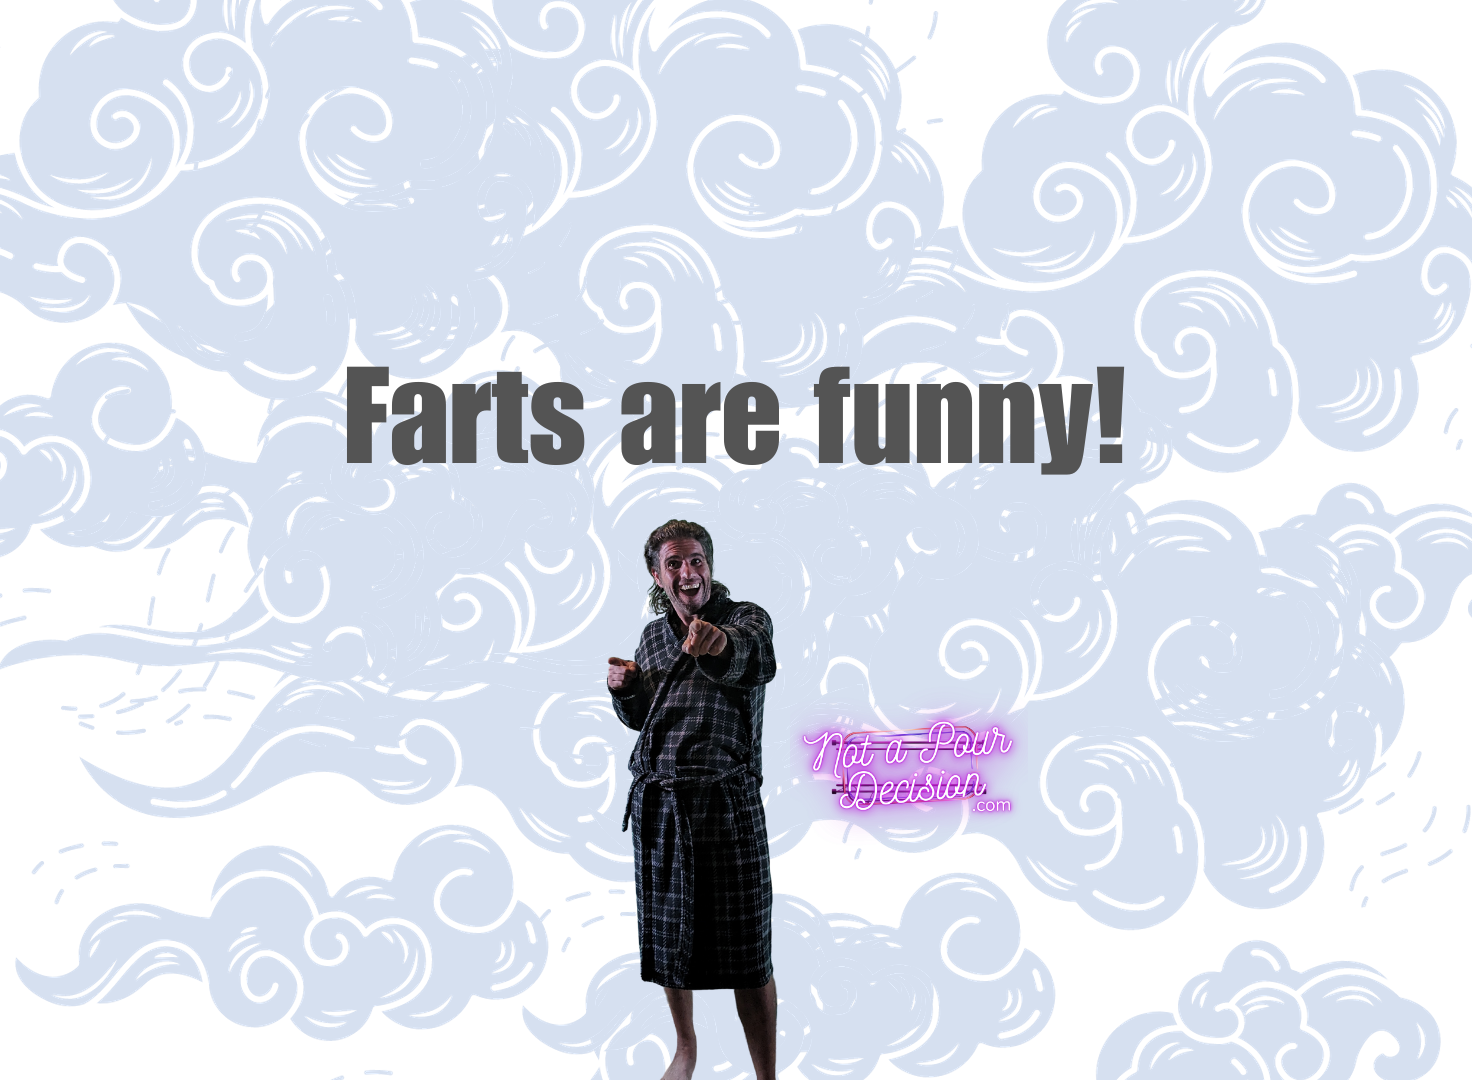 Doesn't everyone think farts are funny?